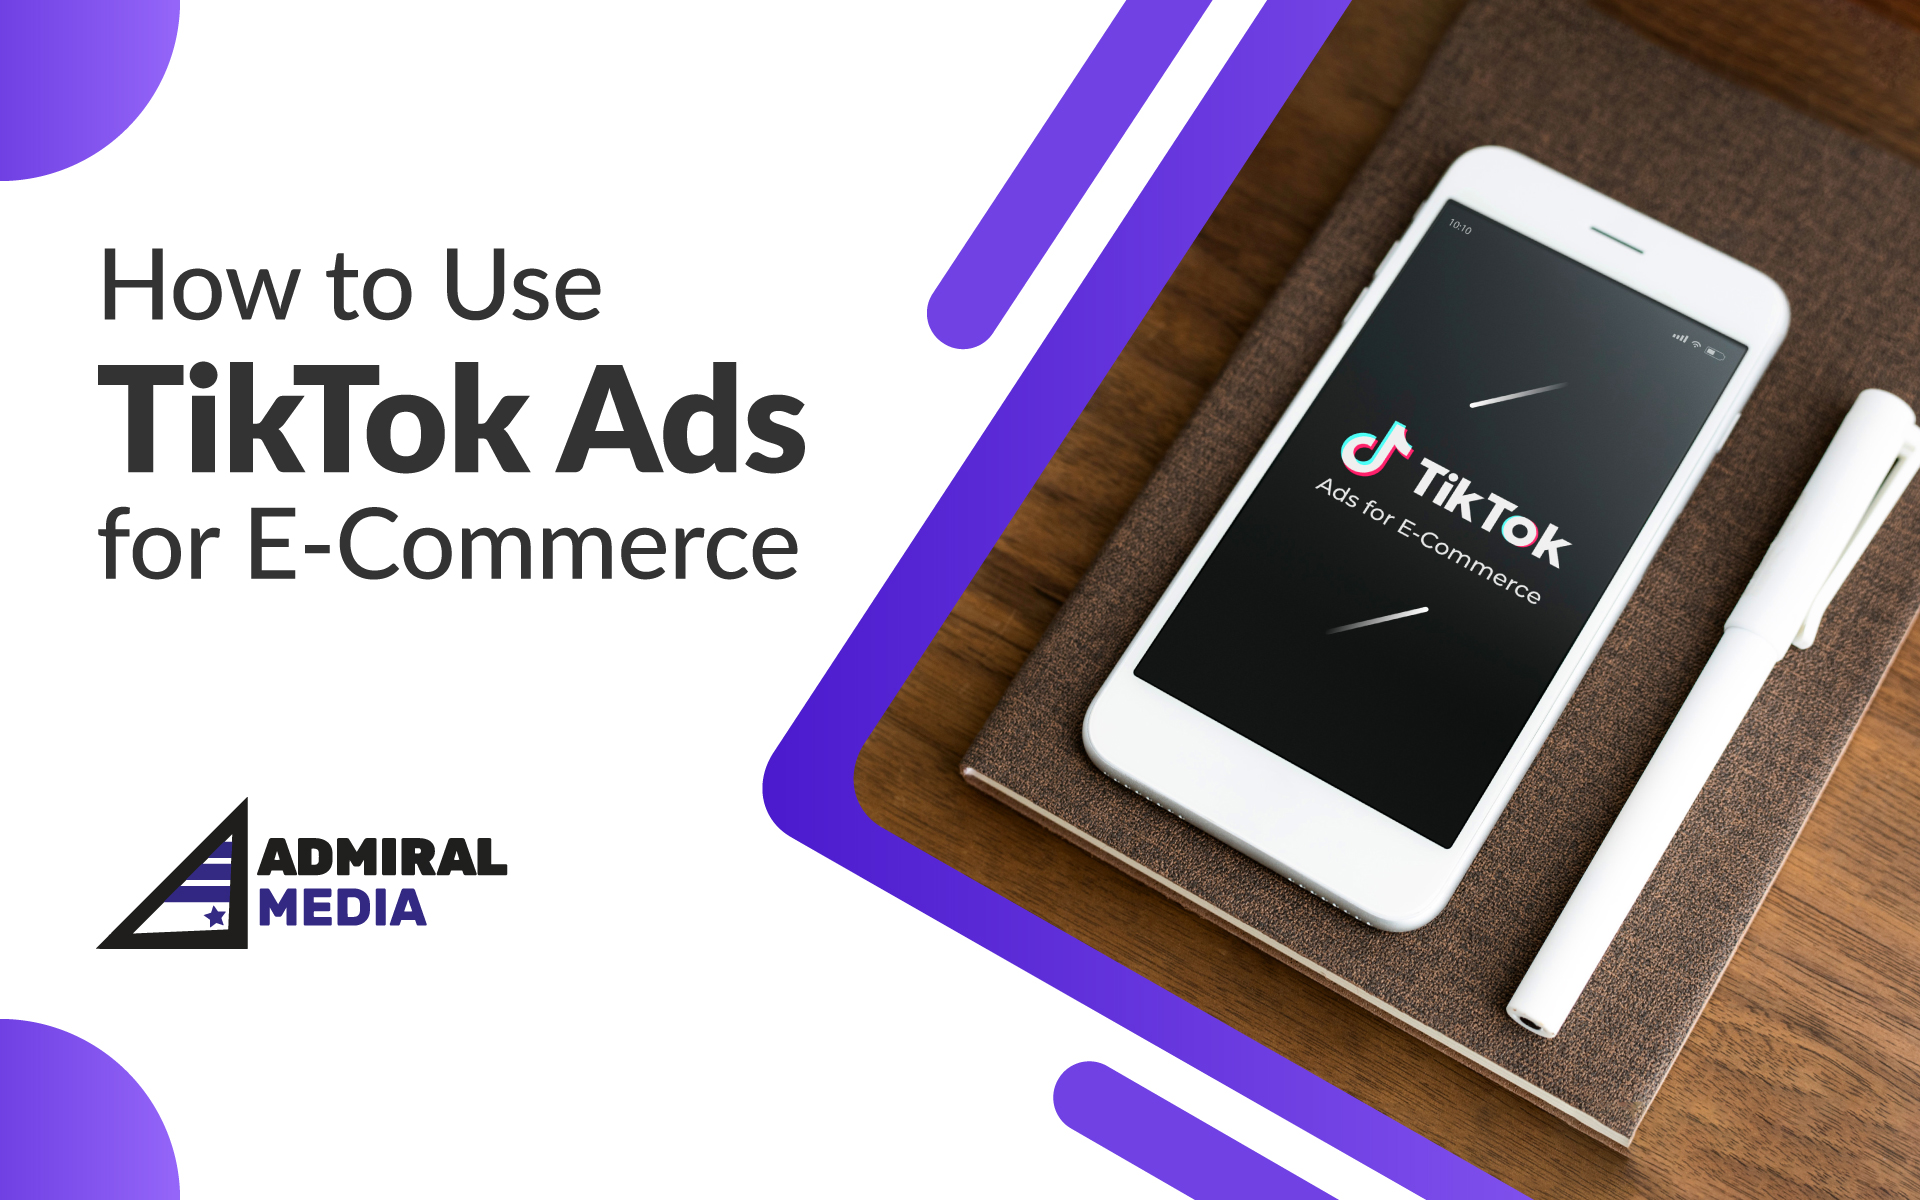 How to Use TikTok Ads for E-Commerce by Admiral Media